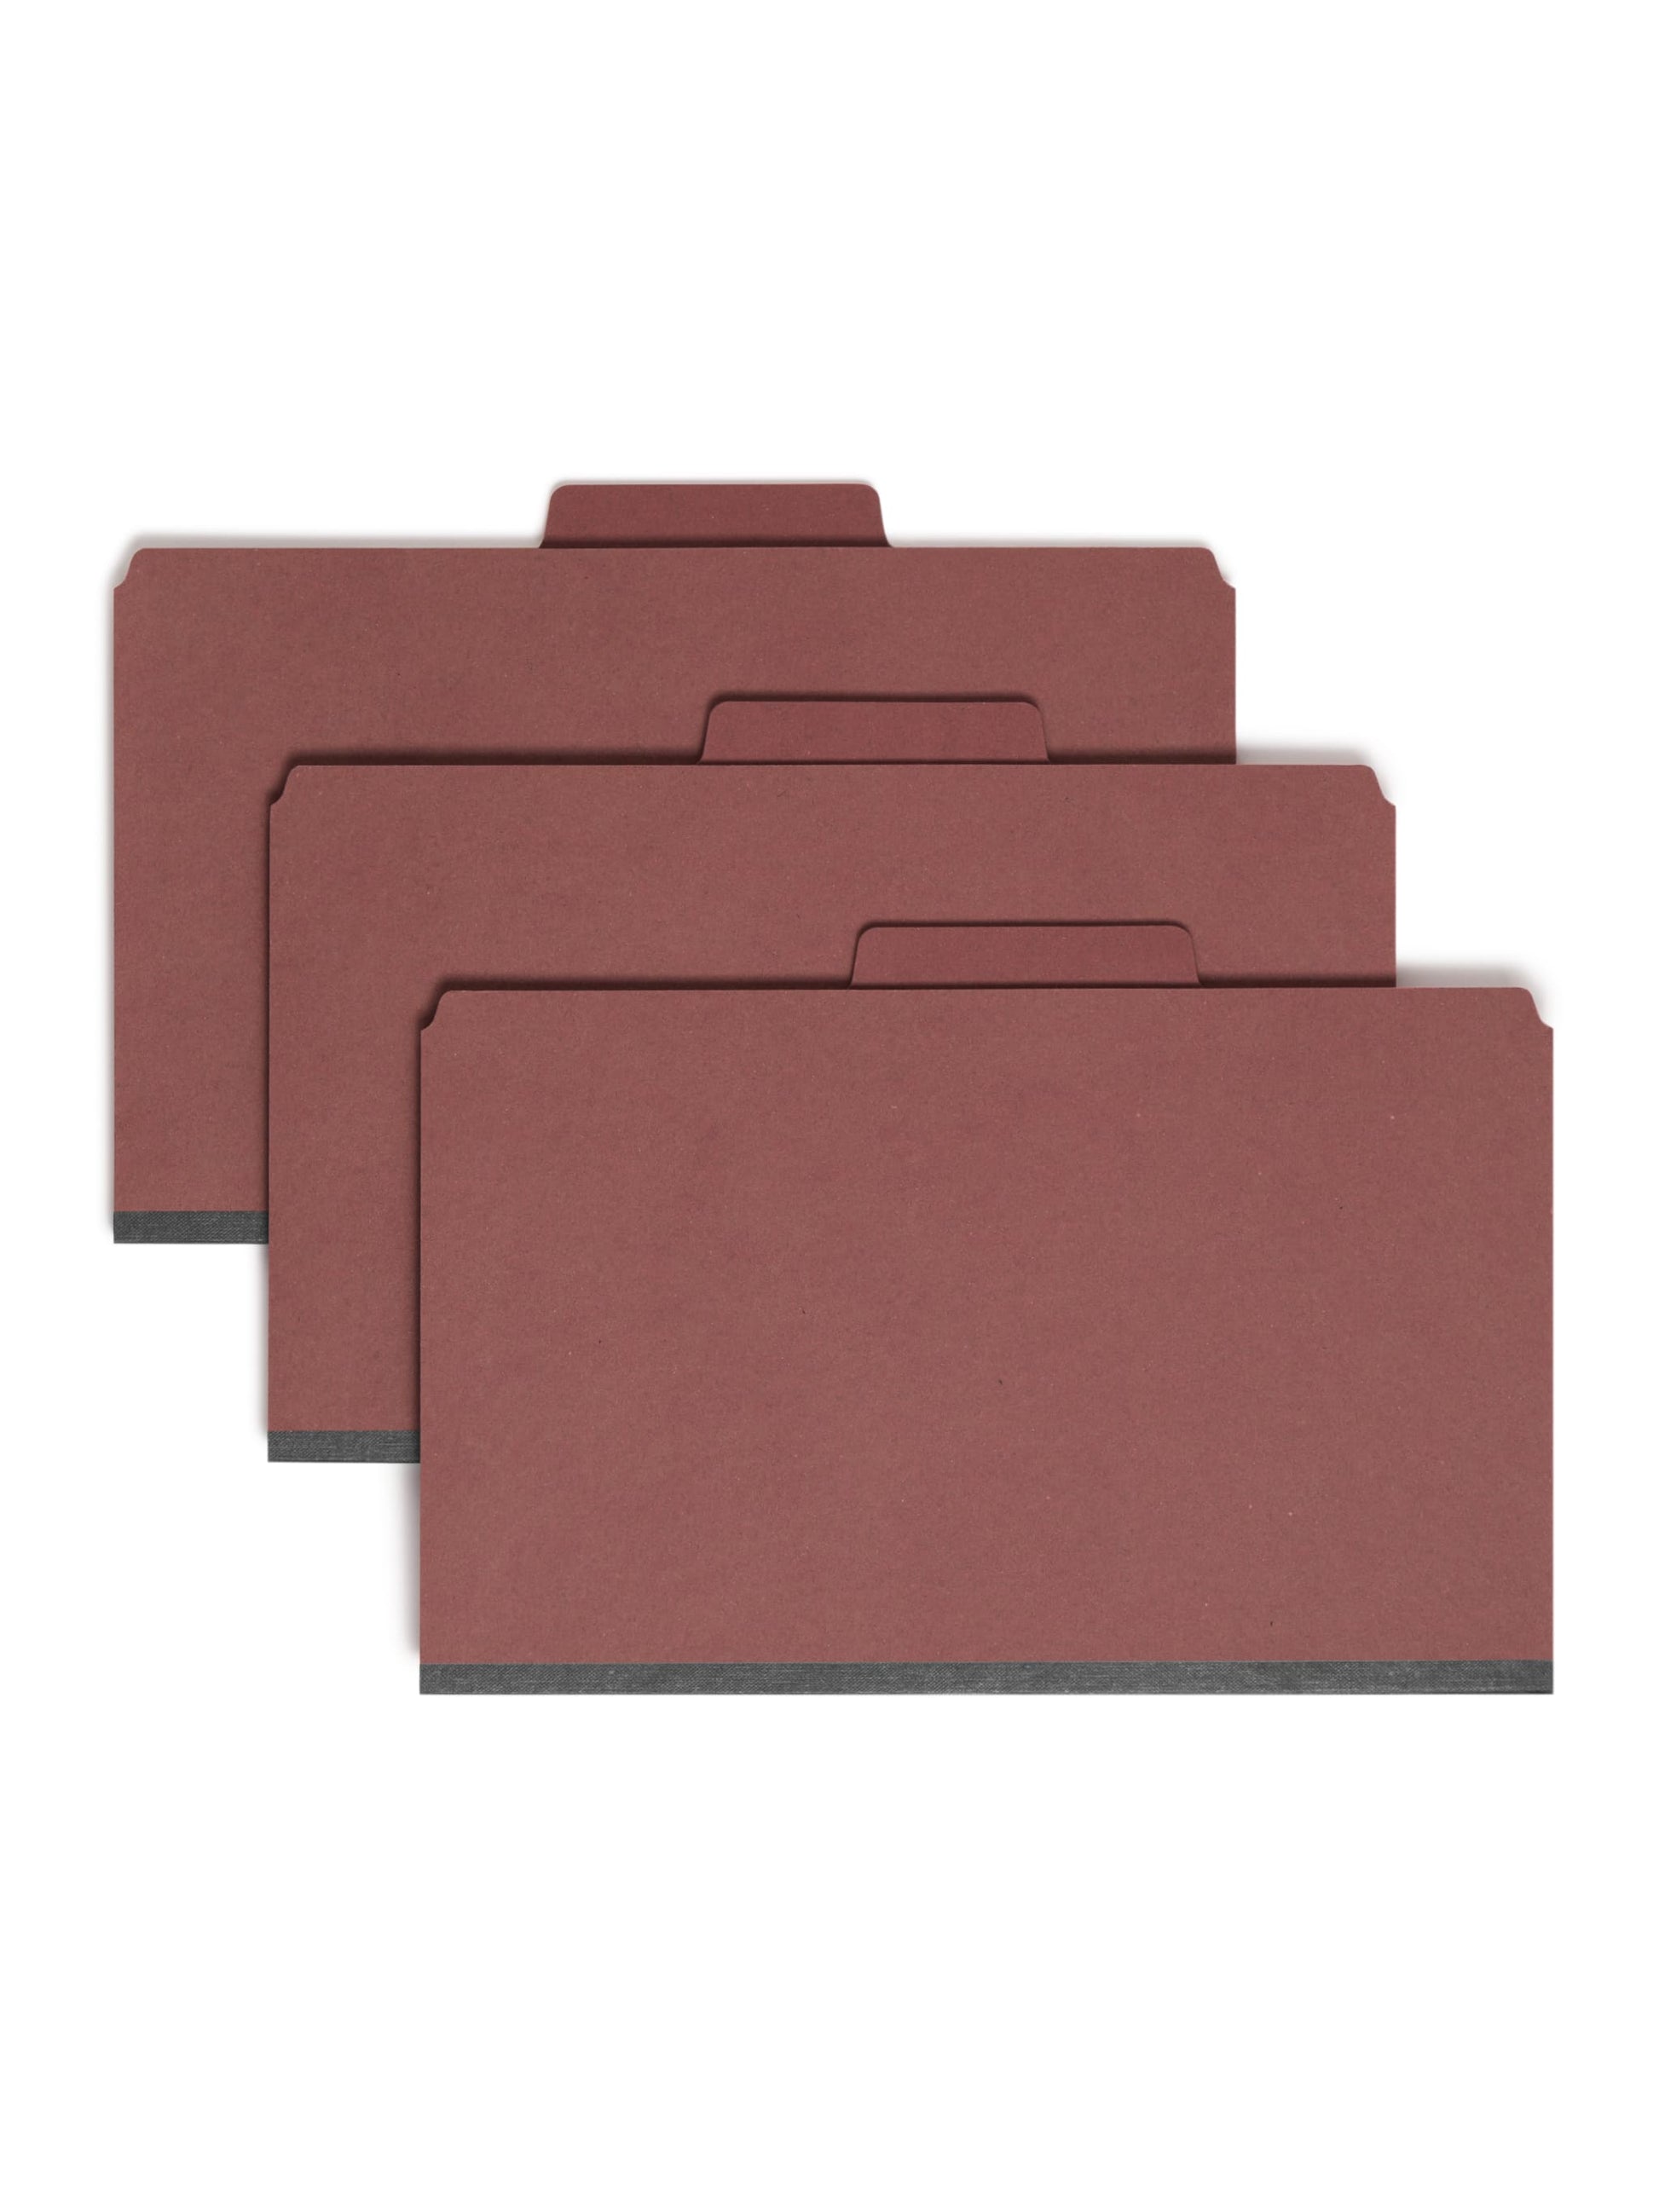 SuperTab® Classification File Folders, Red Color, Legal Size, Set of 0, 30086486190702